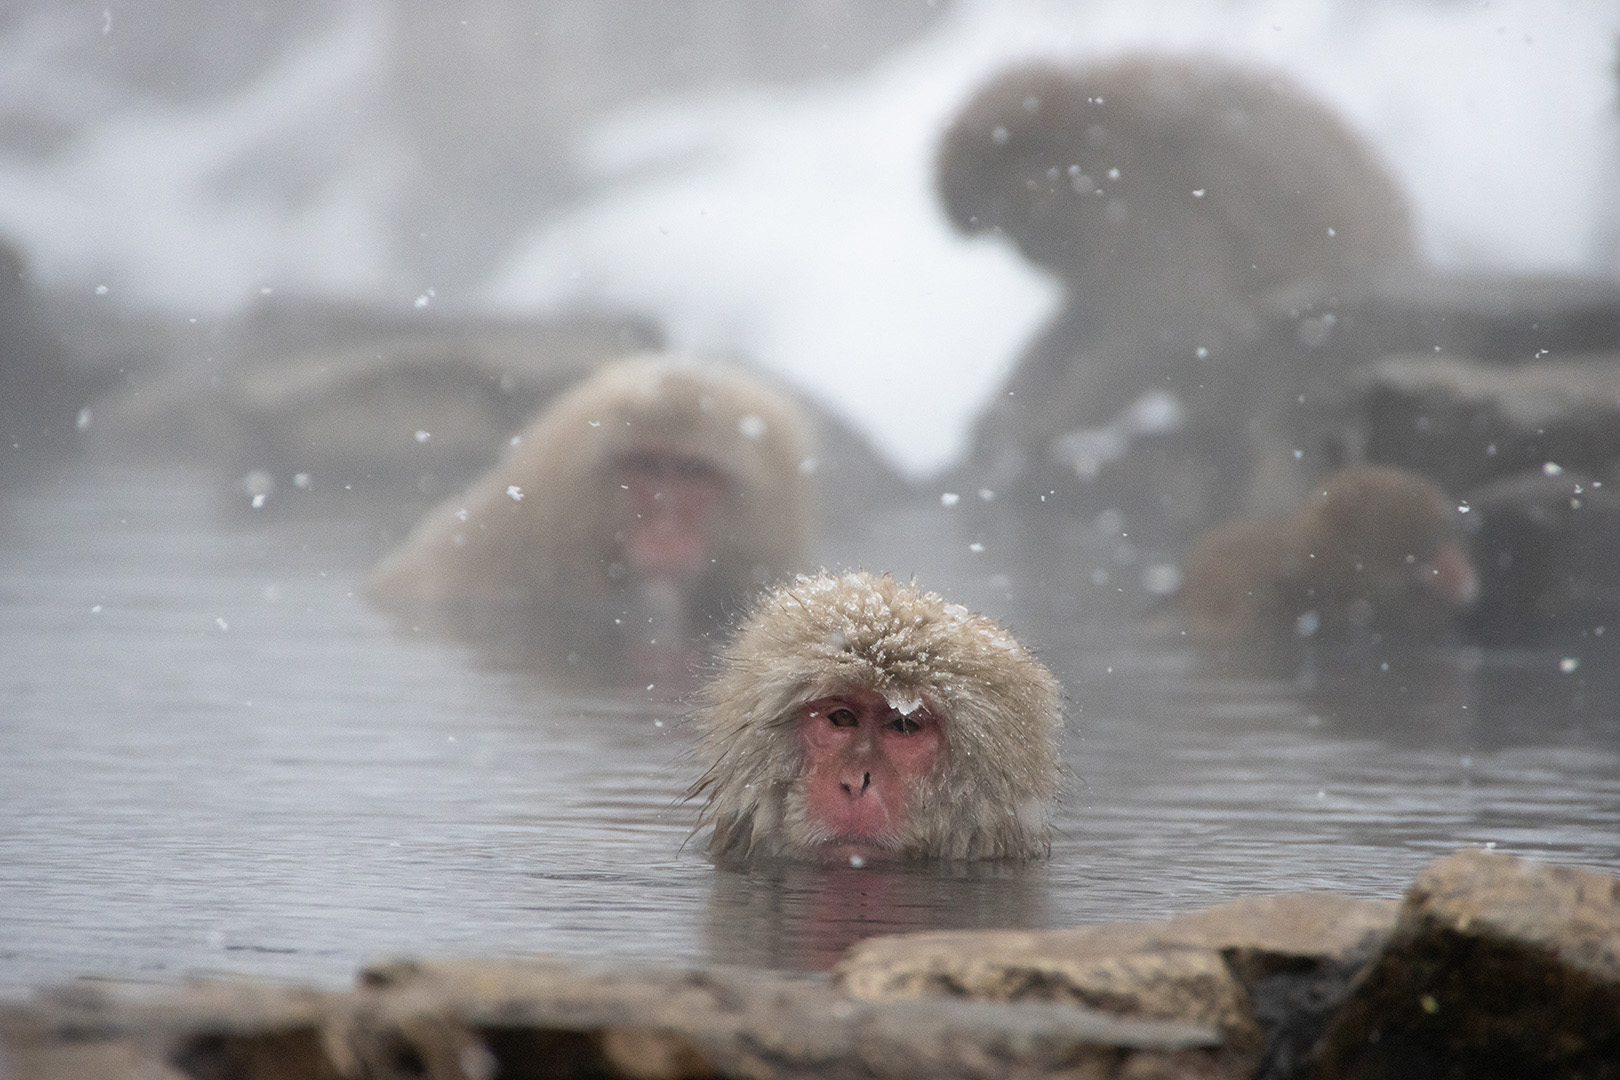 A monkey is soaking in a hot spring